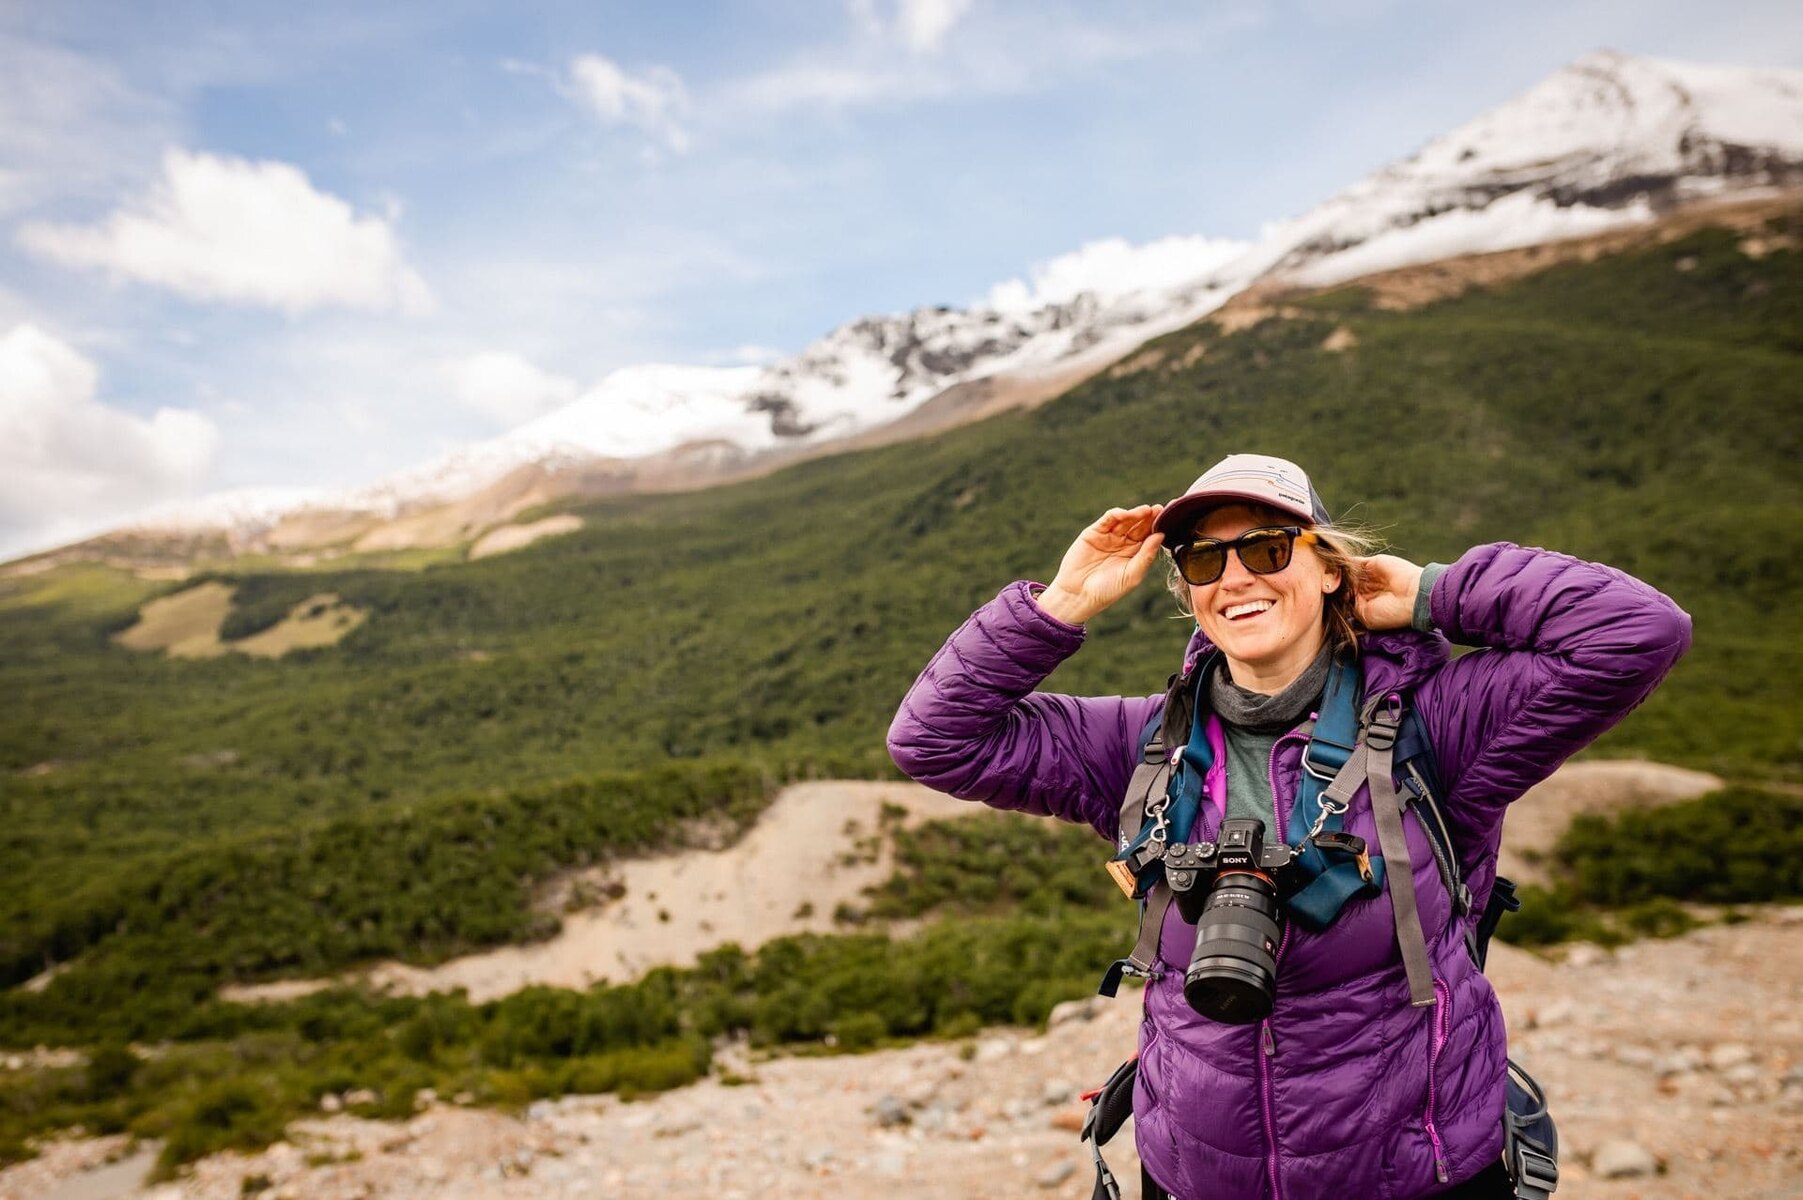 How To Carry A Mirrorless Camera While Hiking